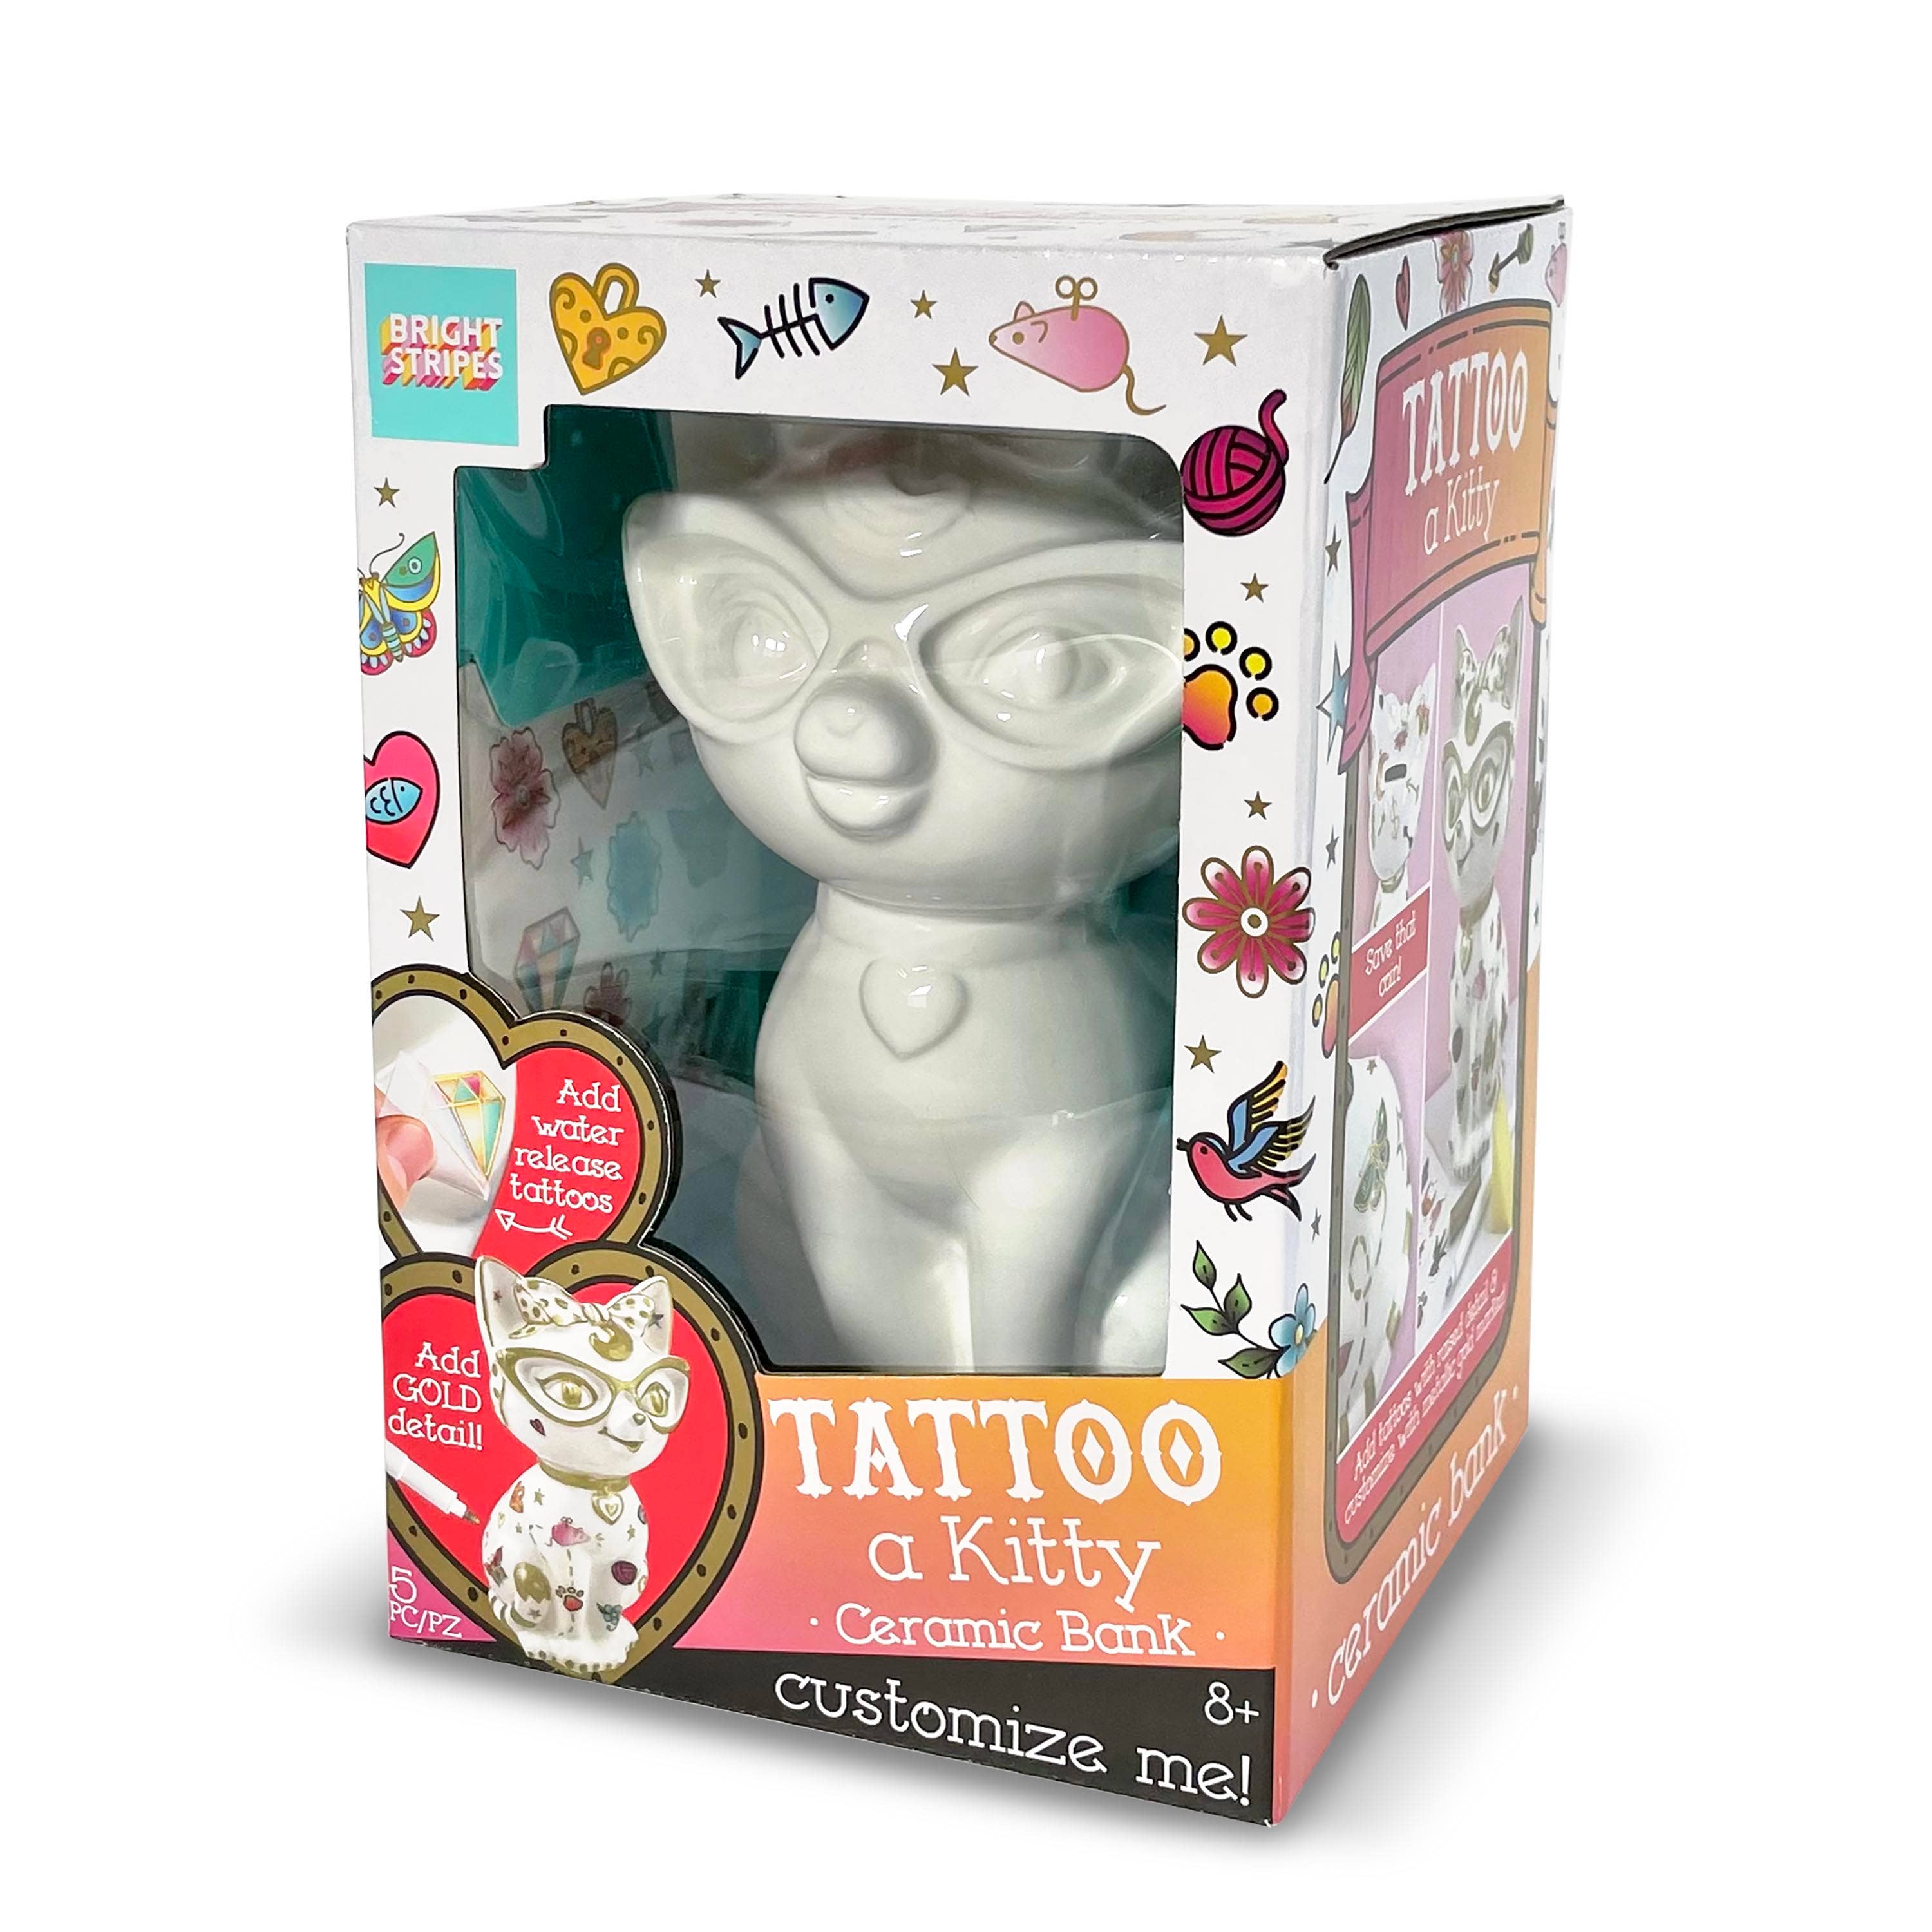 Yay! Ink-A-Do Tattoo Pens